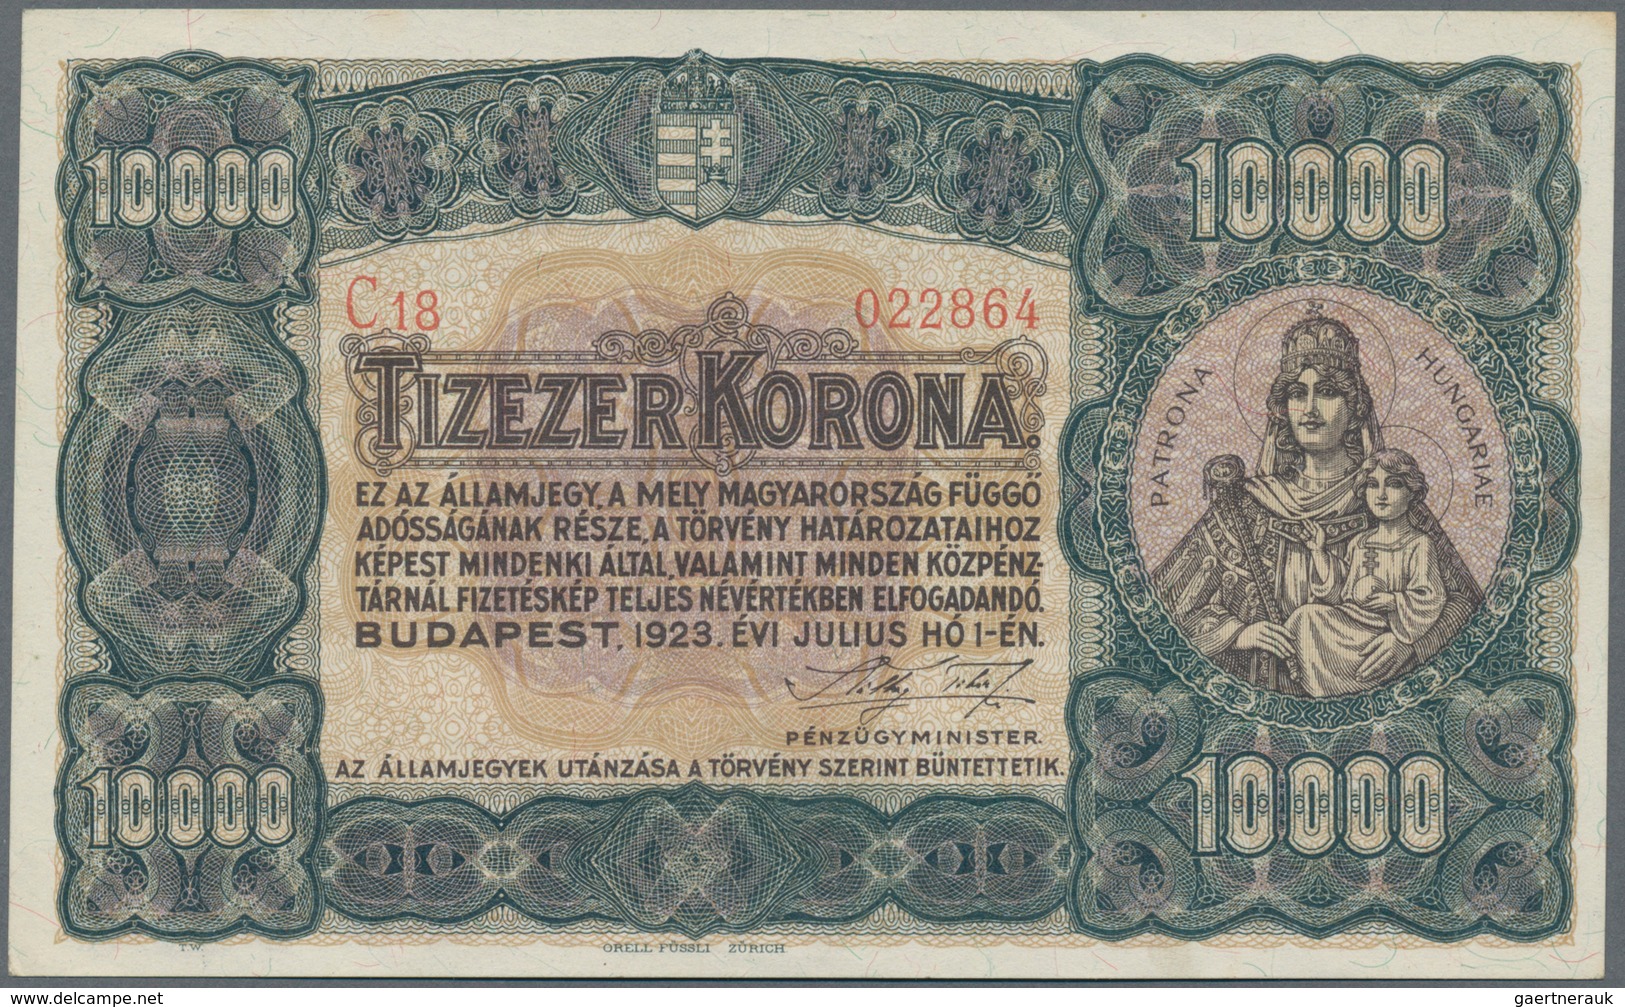 Hungary / Ungarn: Ministry of Finance, set with 11 banknotes comprising 2x 100 Korona P.73a,b (UNC,